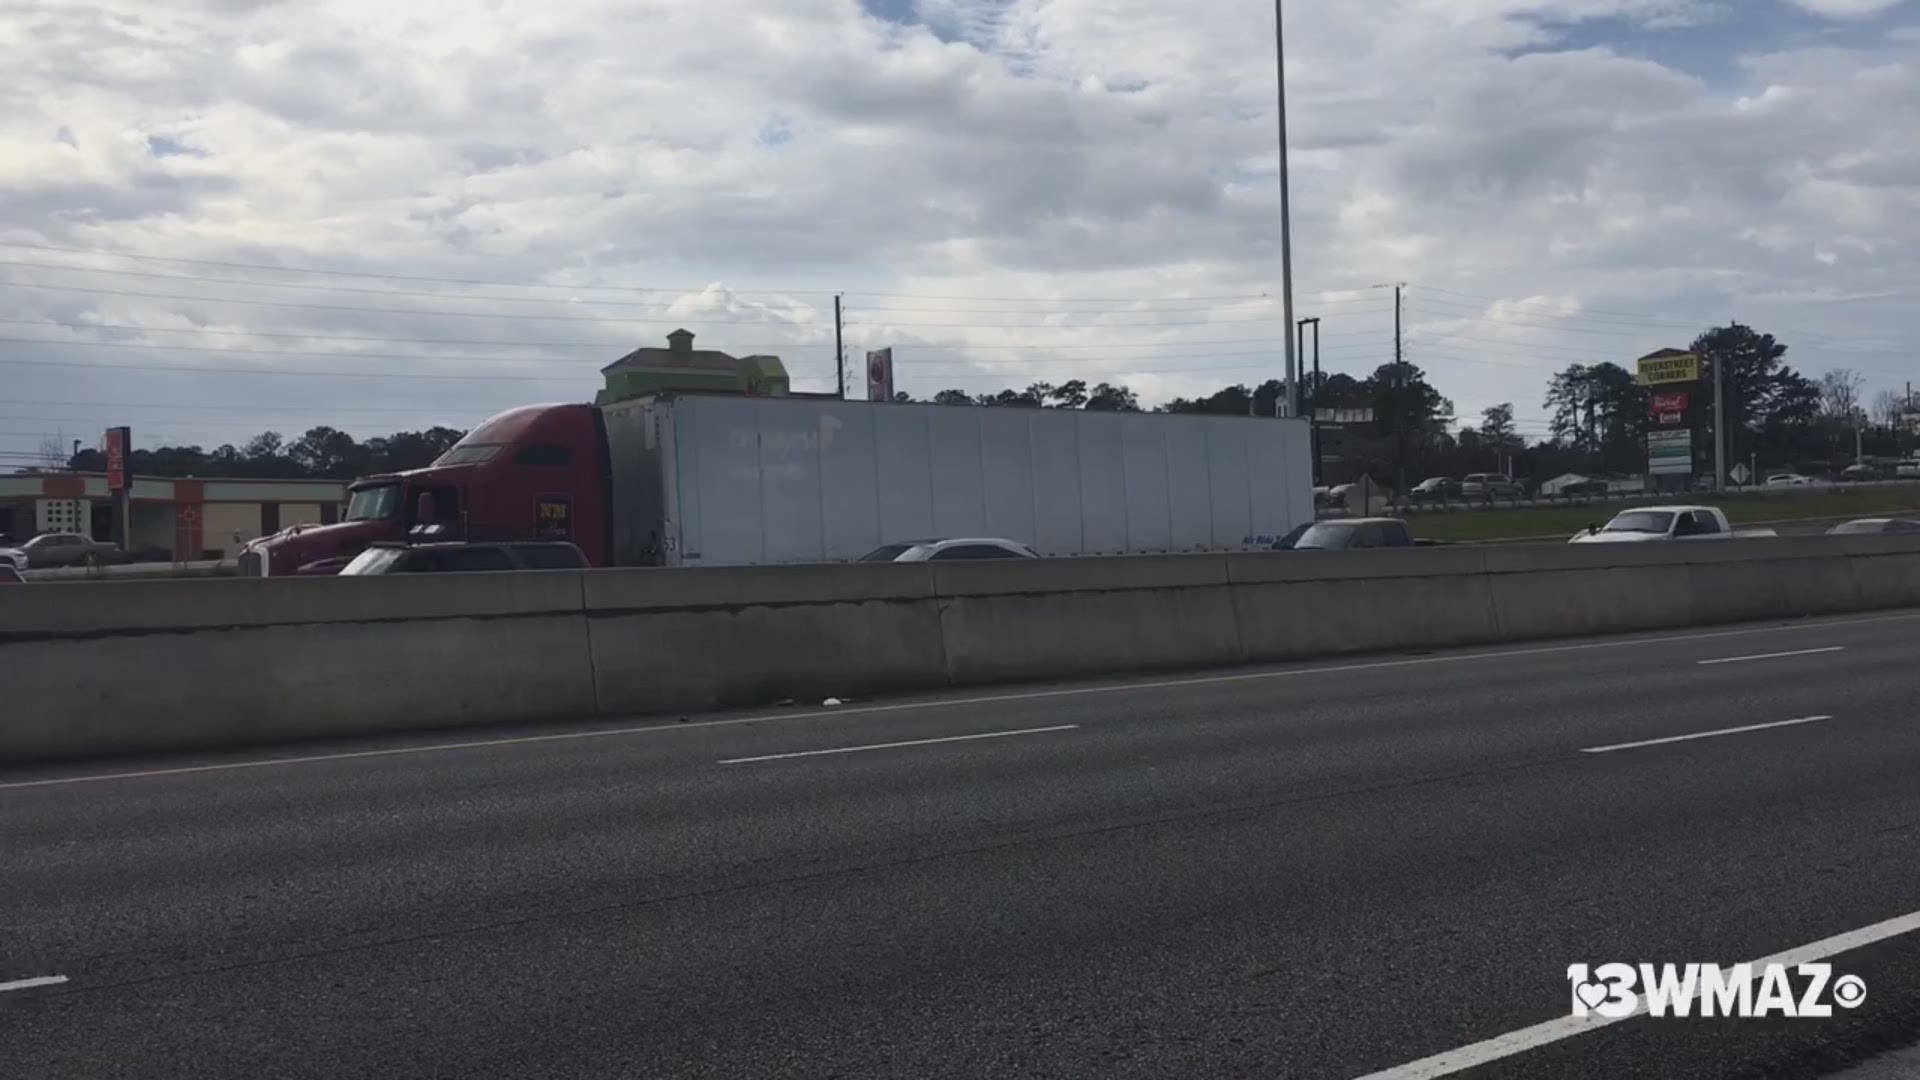 Traffic is backed up for miles on I-75S near the I-16E interchange after a fuel spill shut down all lanes.